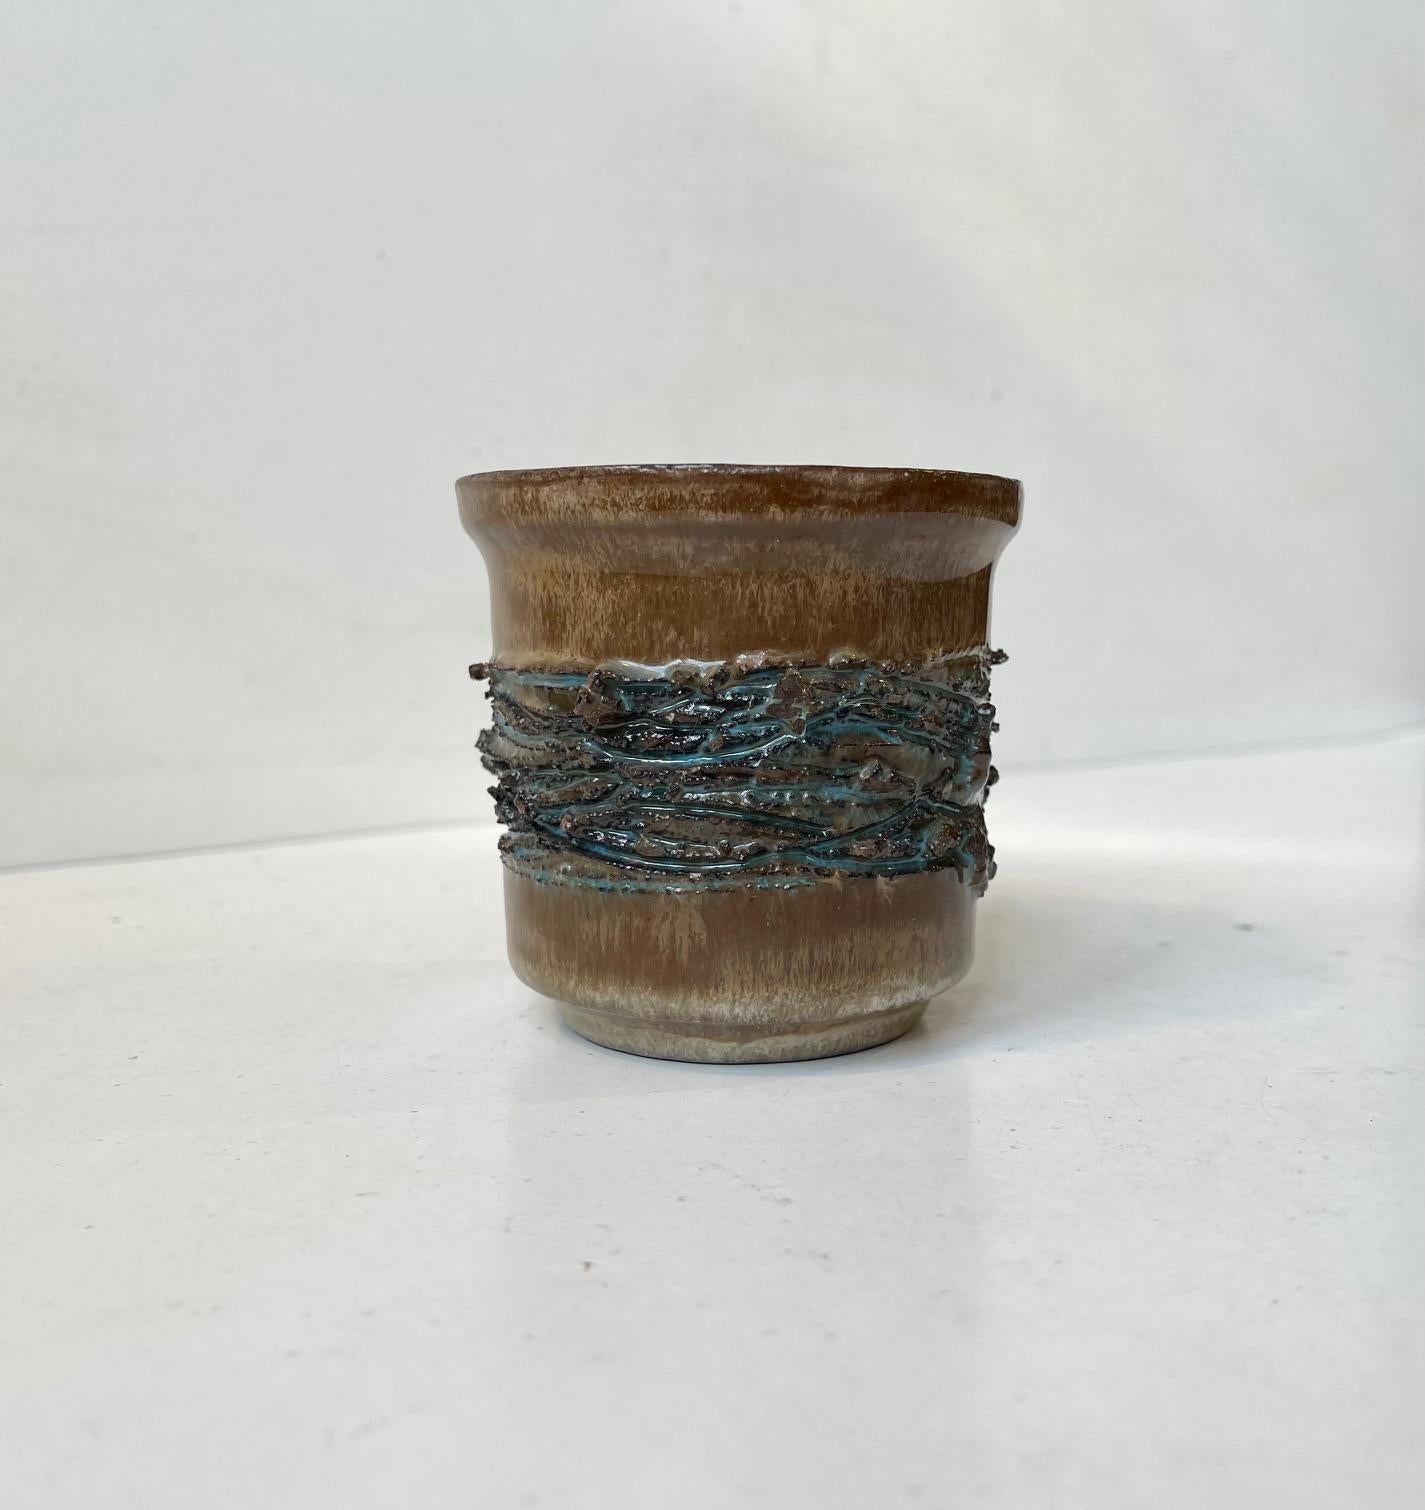 HF Gilt is a renowned Icelandic ceramic pottery studio. The clay used in this piece is made from pumice stone collected from Icelandic volcanos. The texture partially decorated with vibrant blue glaze is also created using real lava collected from